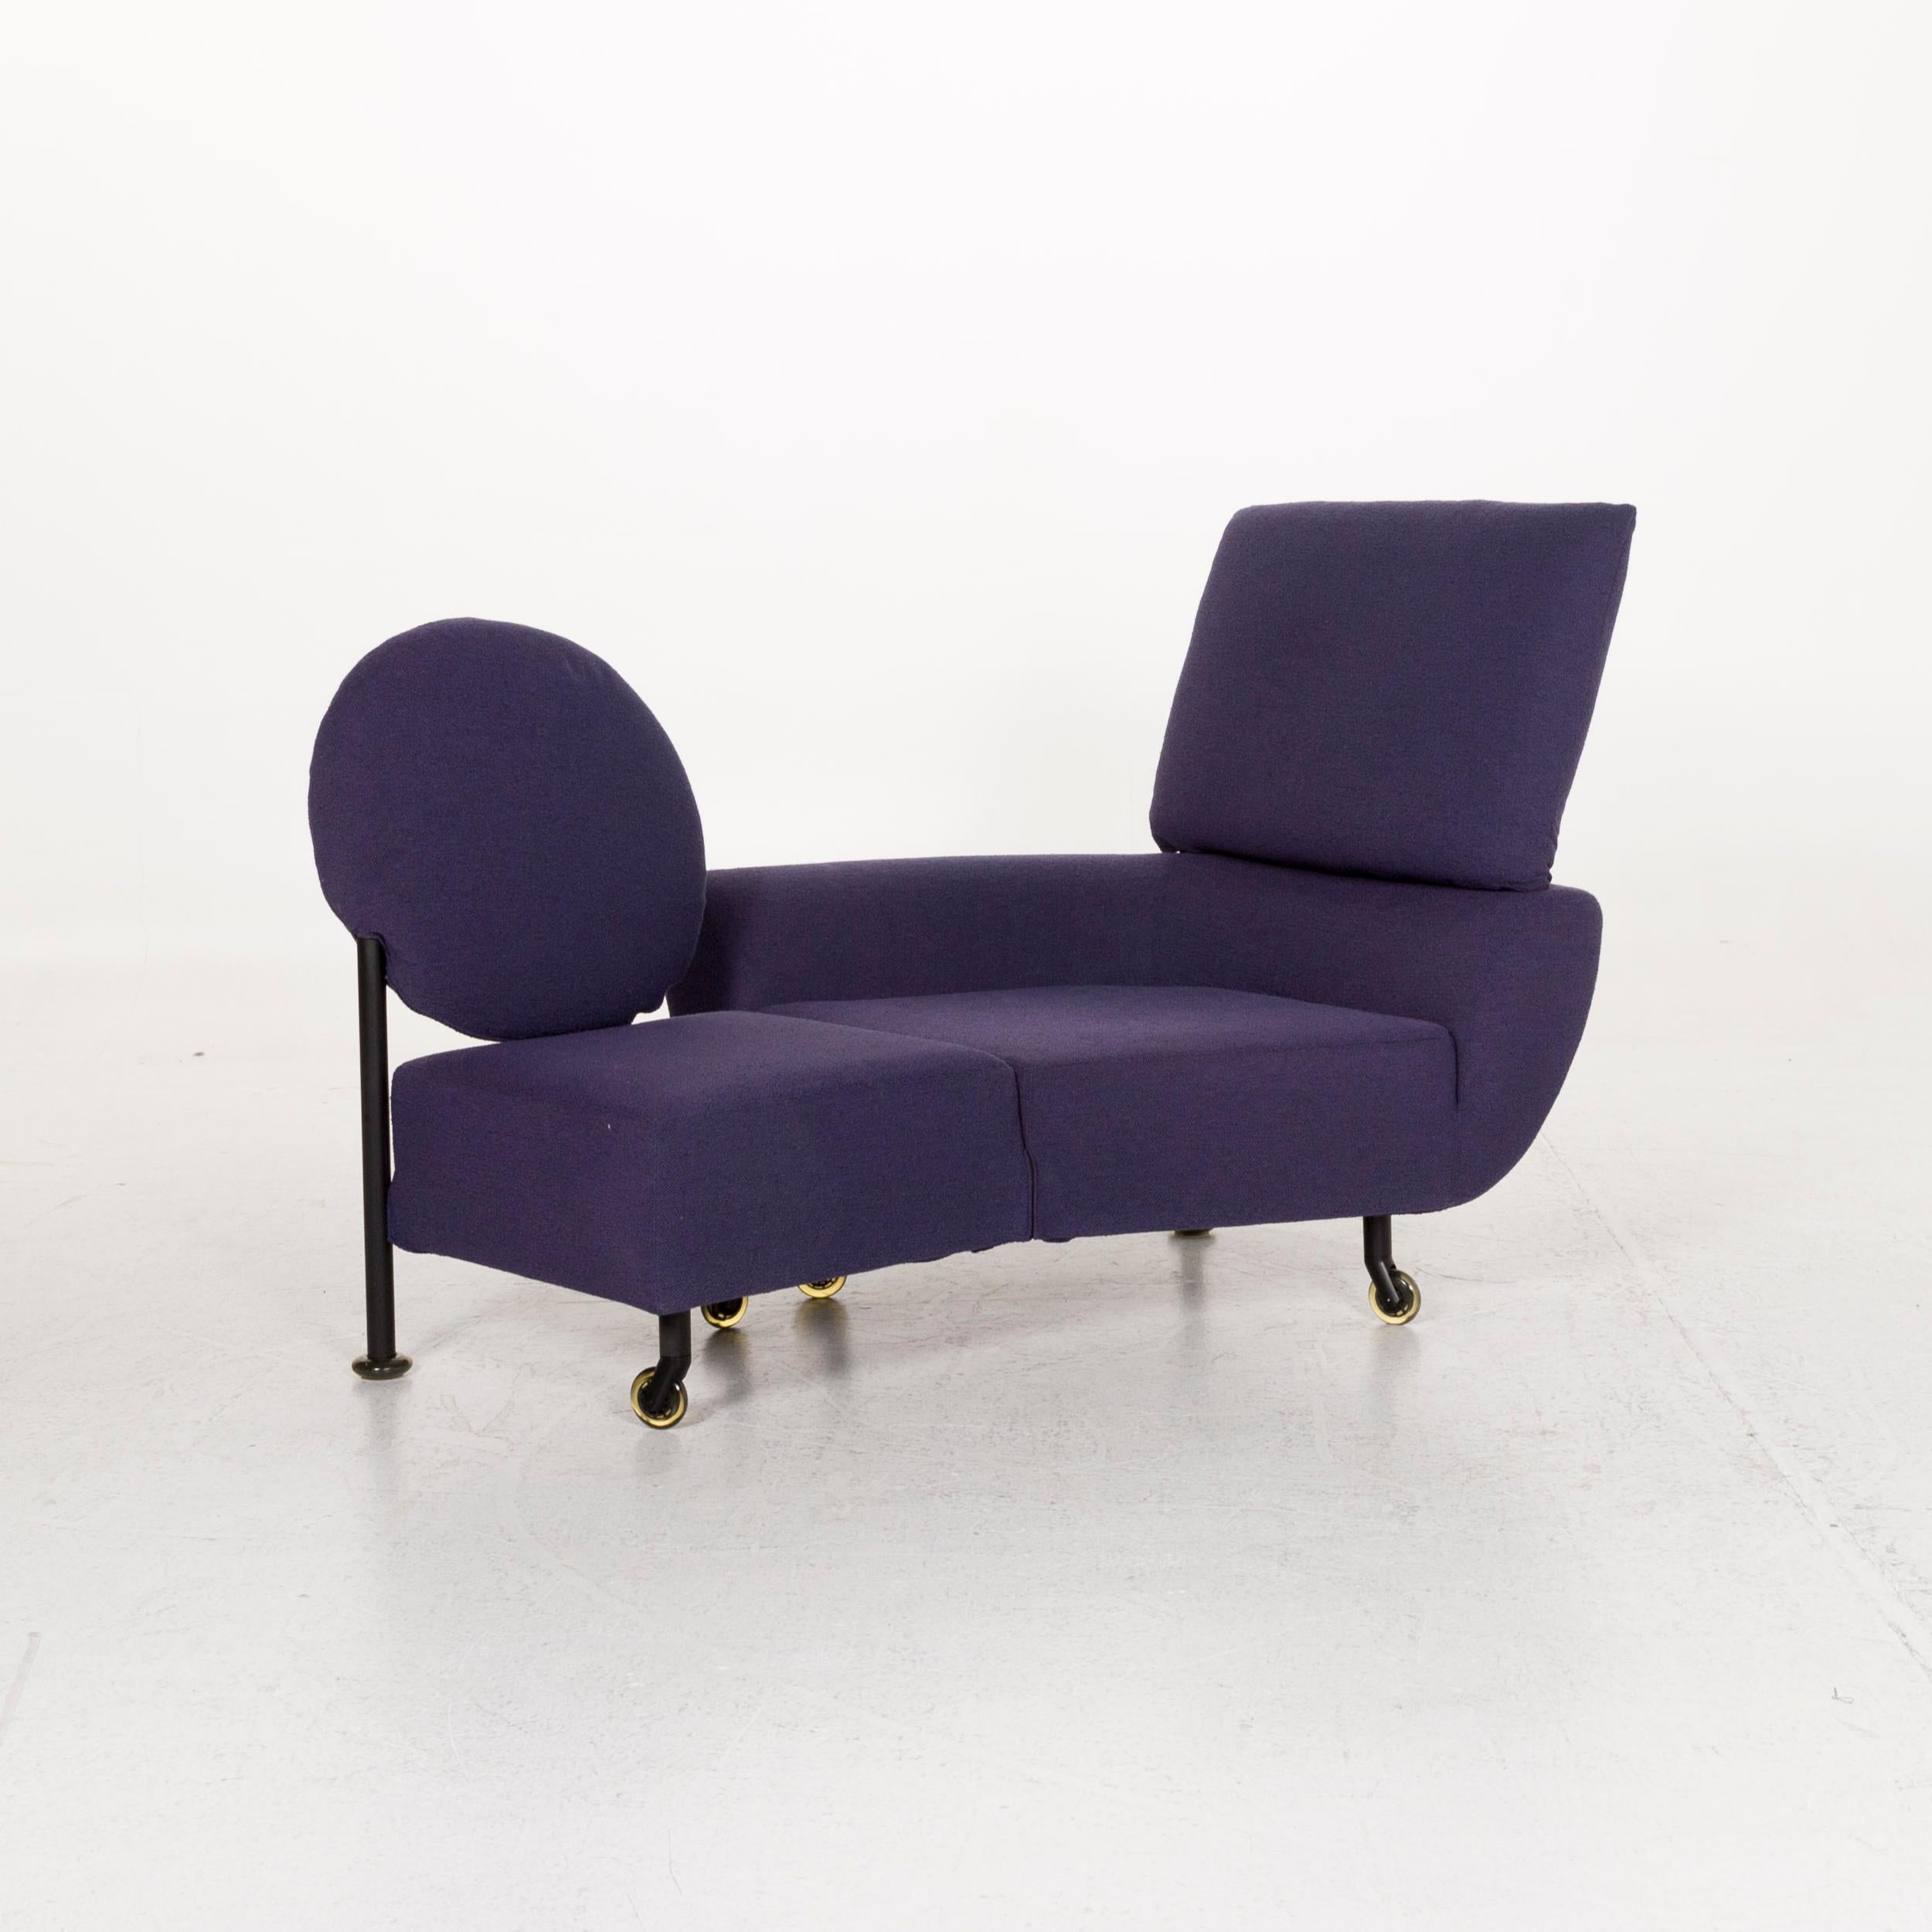 We bring to you a Cassina 290 TopKapi fabric sofa violet two-seat function relax function couch.

 

 Product measurements in centimeters:
 

Depth 105
Width 140
Height 107
Seat-height 42
Rest-height 56
Seat-depth 48
Seat-width